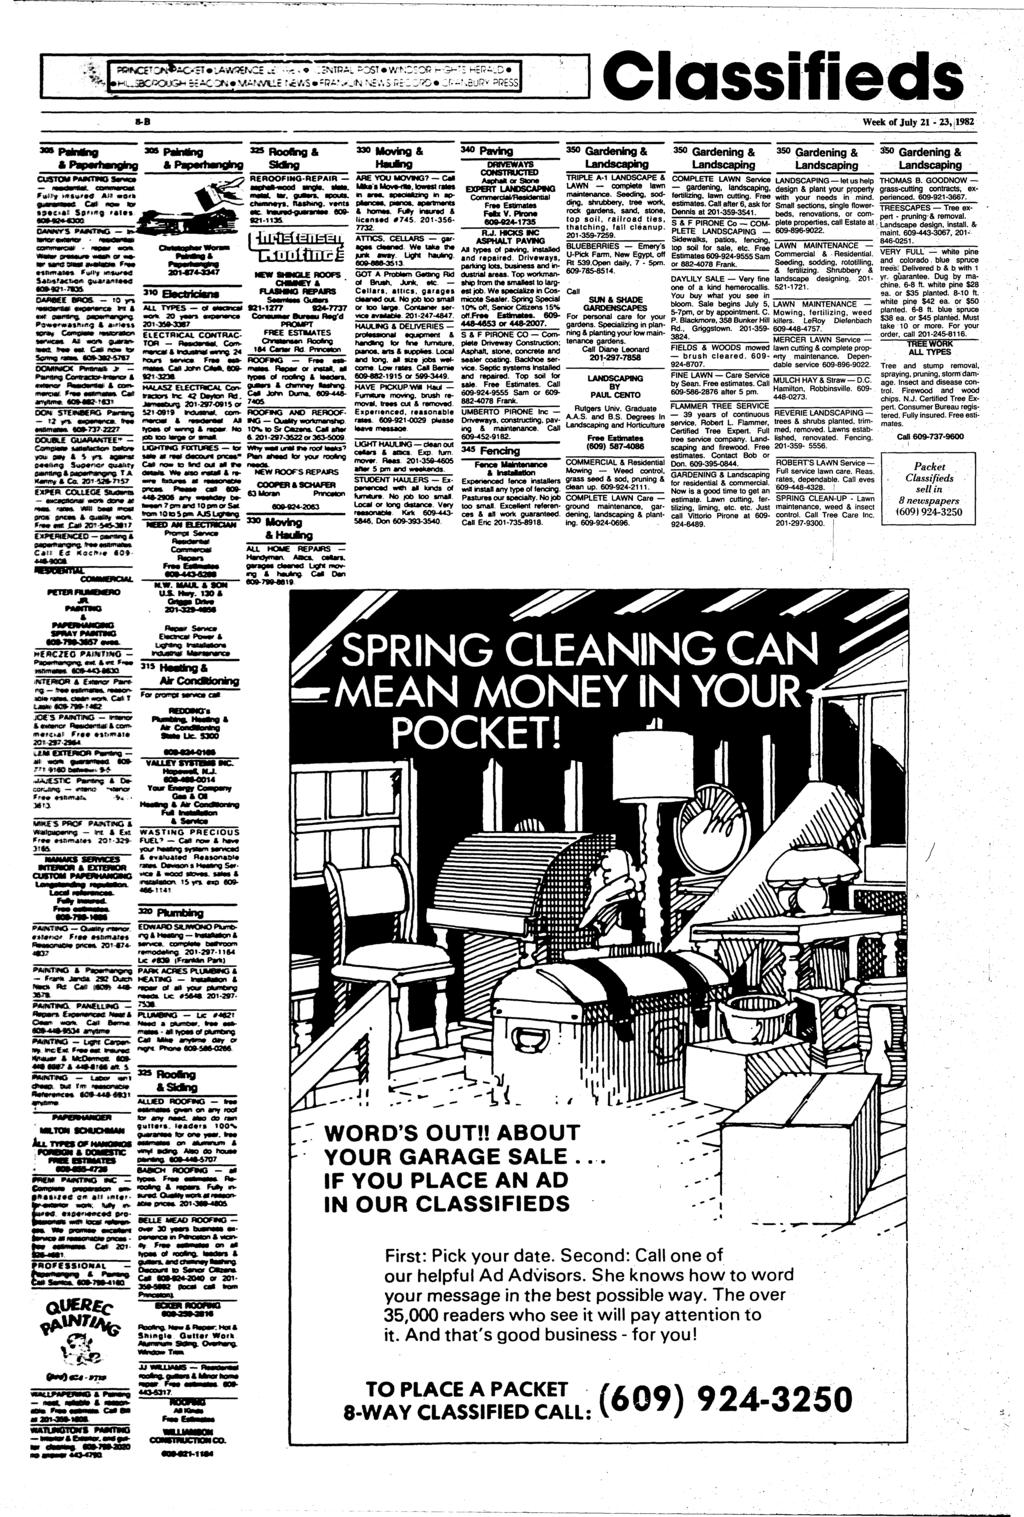 *..., Classifieds 8-B Week of July 21-23, 1982 9*C*«II - ««_«. Roofing A *» Moving* Hauing REROOFIMG-REPAIR ARE YOU MOVING? Cal cnmwy. Raxhwtg. vtnts etc tnmn&gmmrmm.